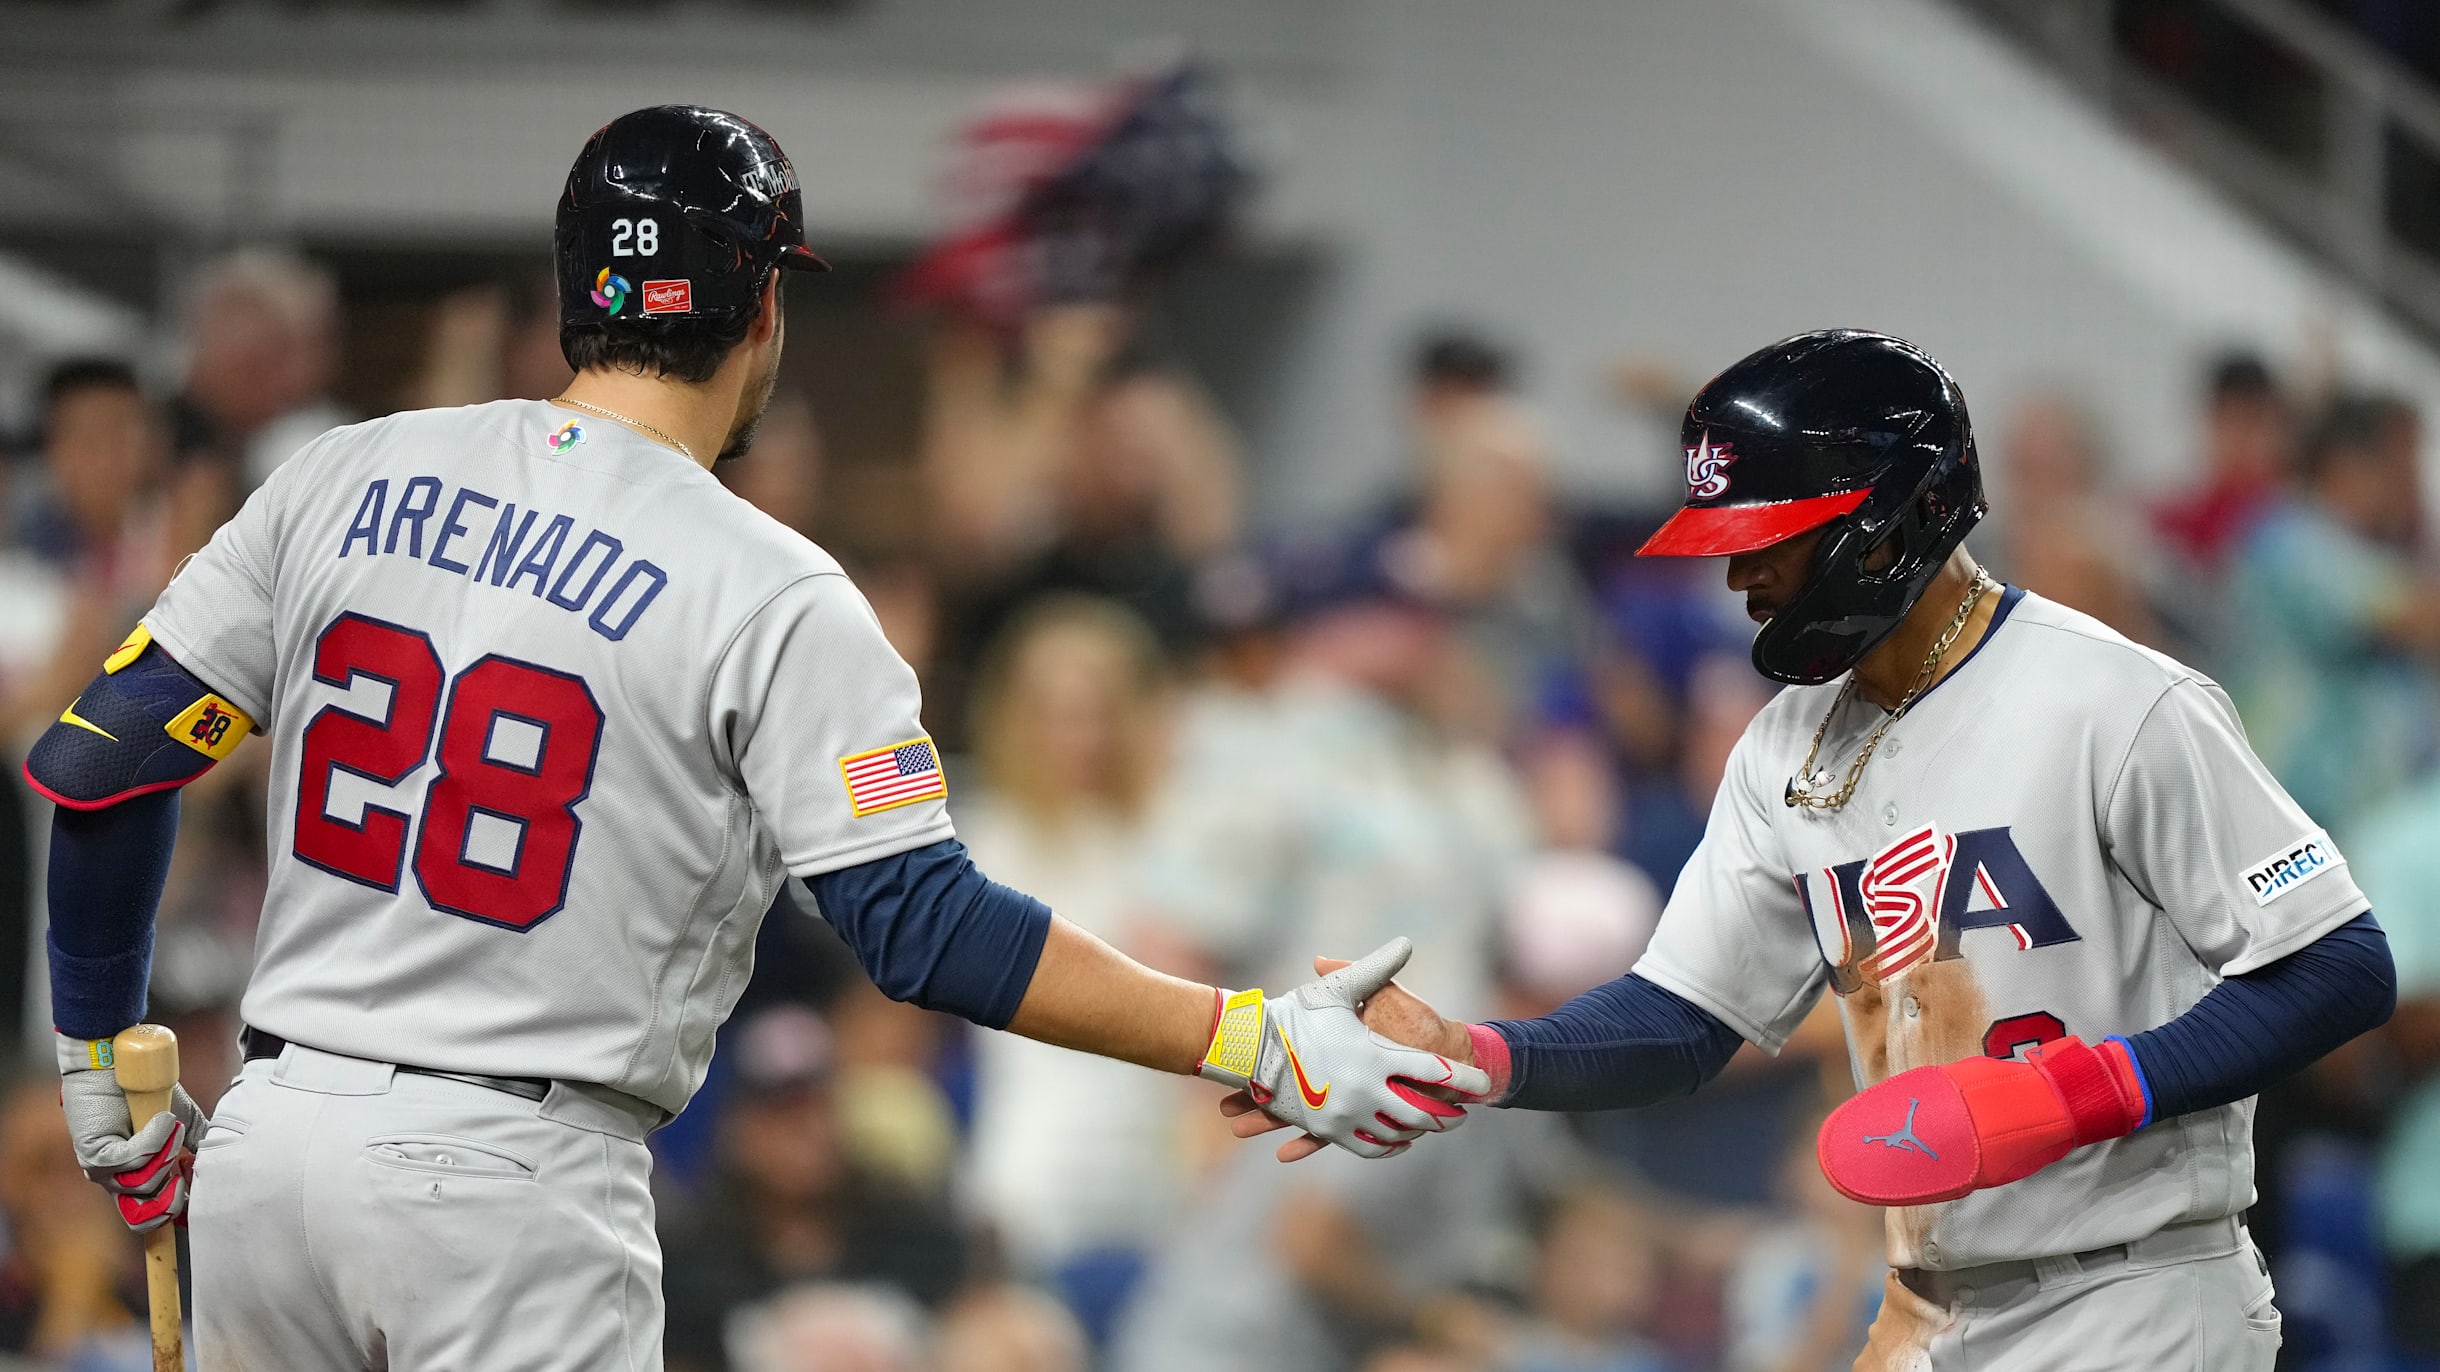 USA vs Cuba World Baseball Classic 2023 semi-final: Preview, schedule, and how to watch live action